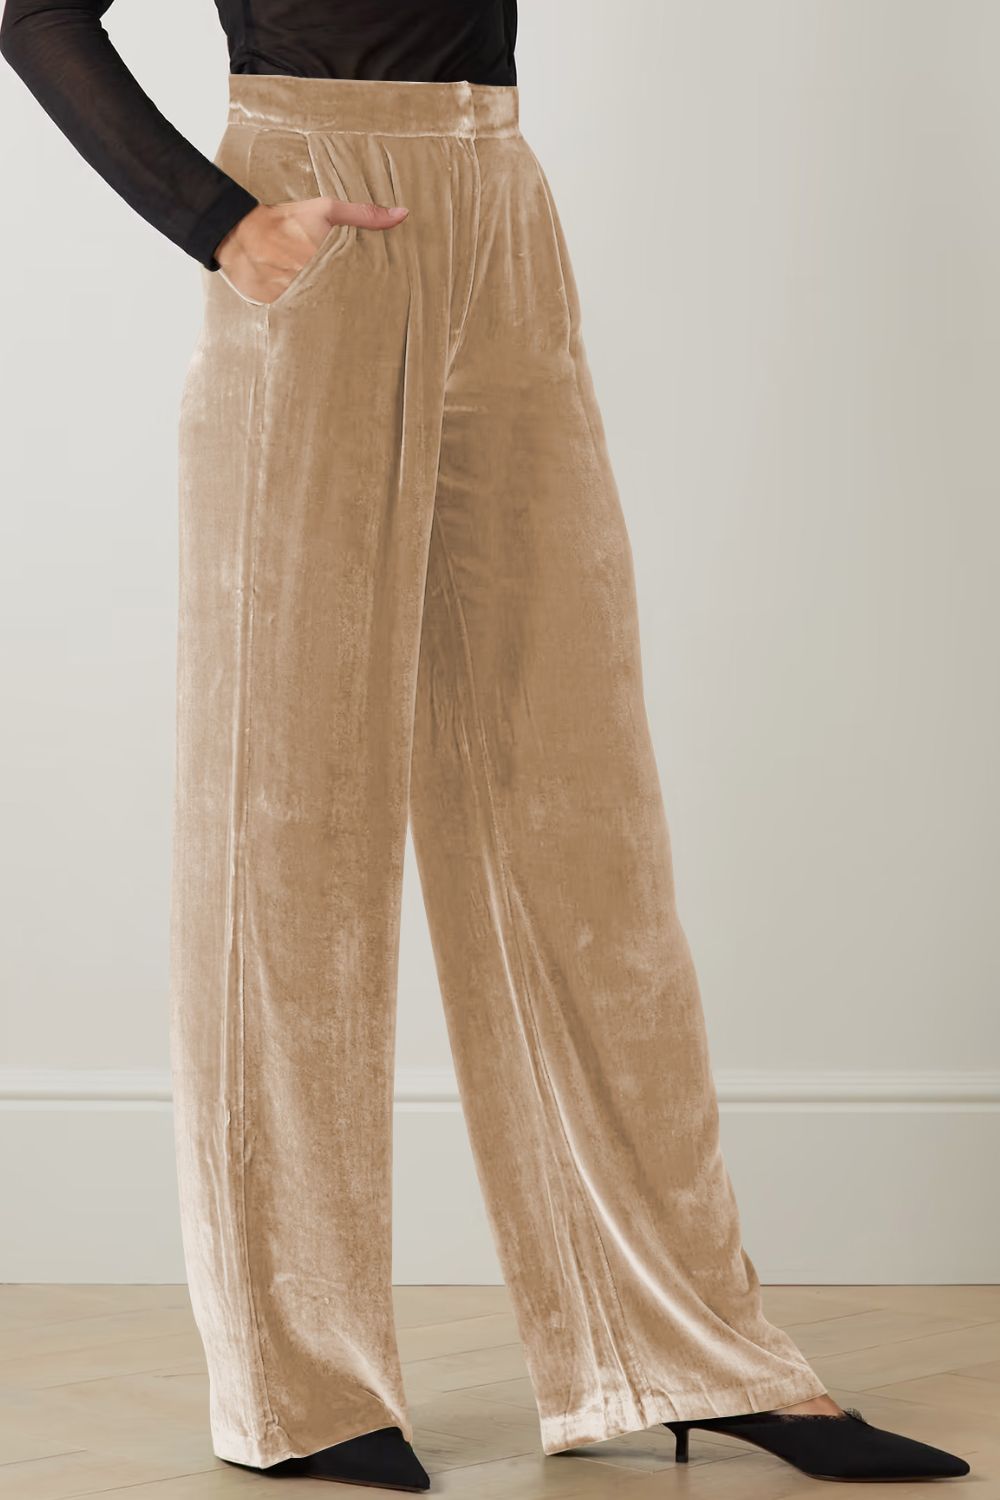 Loose Fit High Waist Long Pants with Pockets - Bottoms - Pants - 19 - 2024